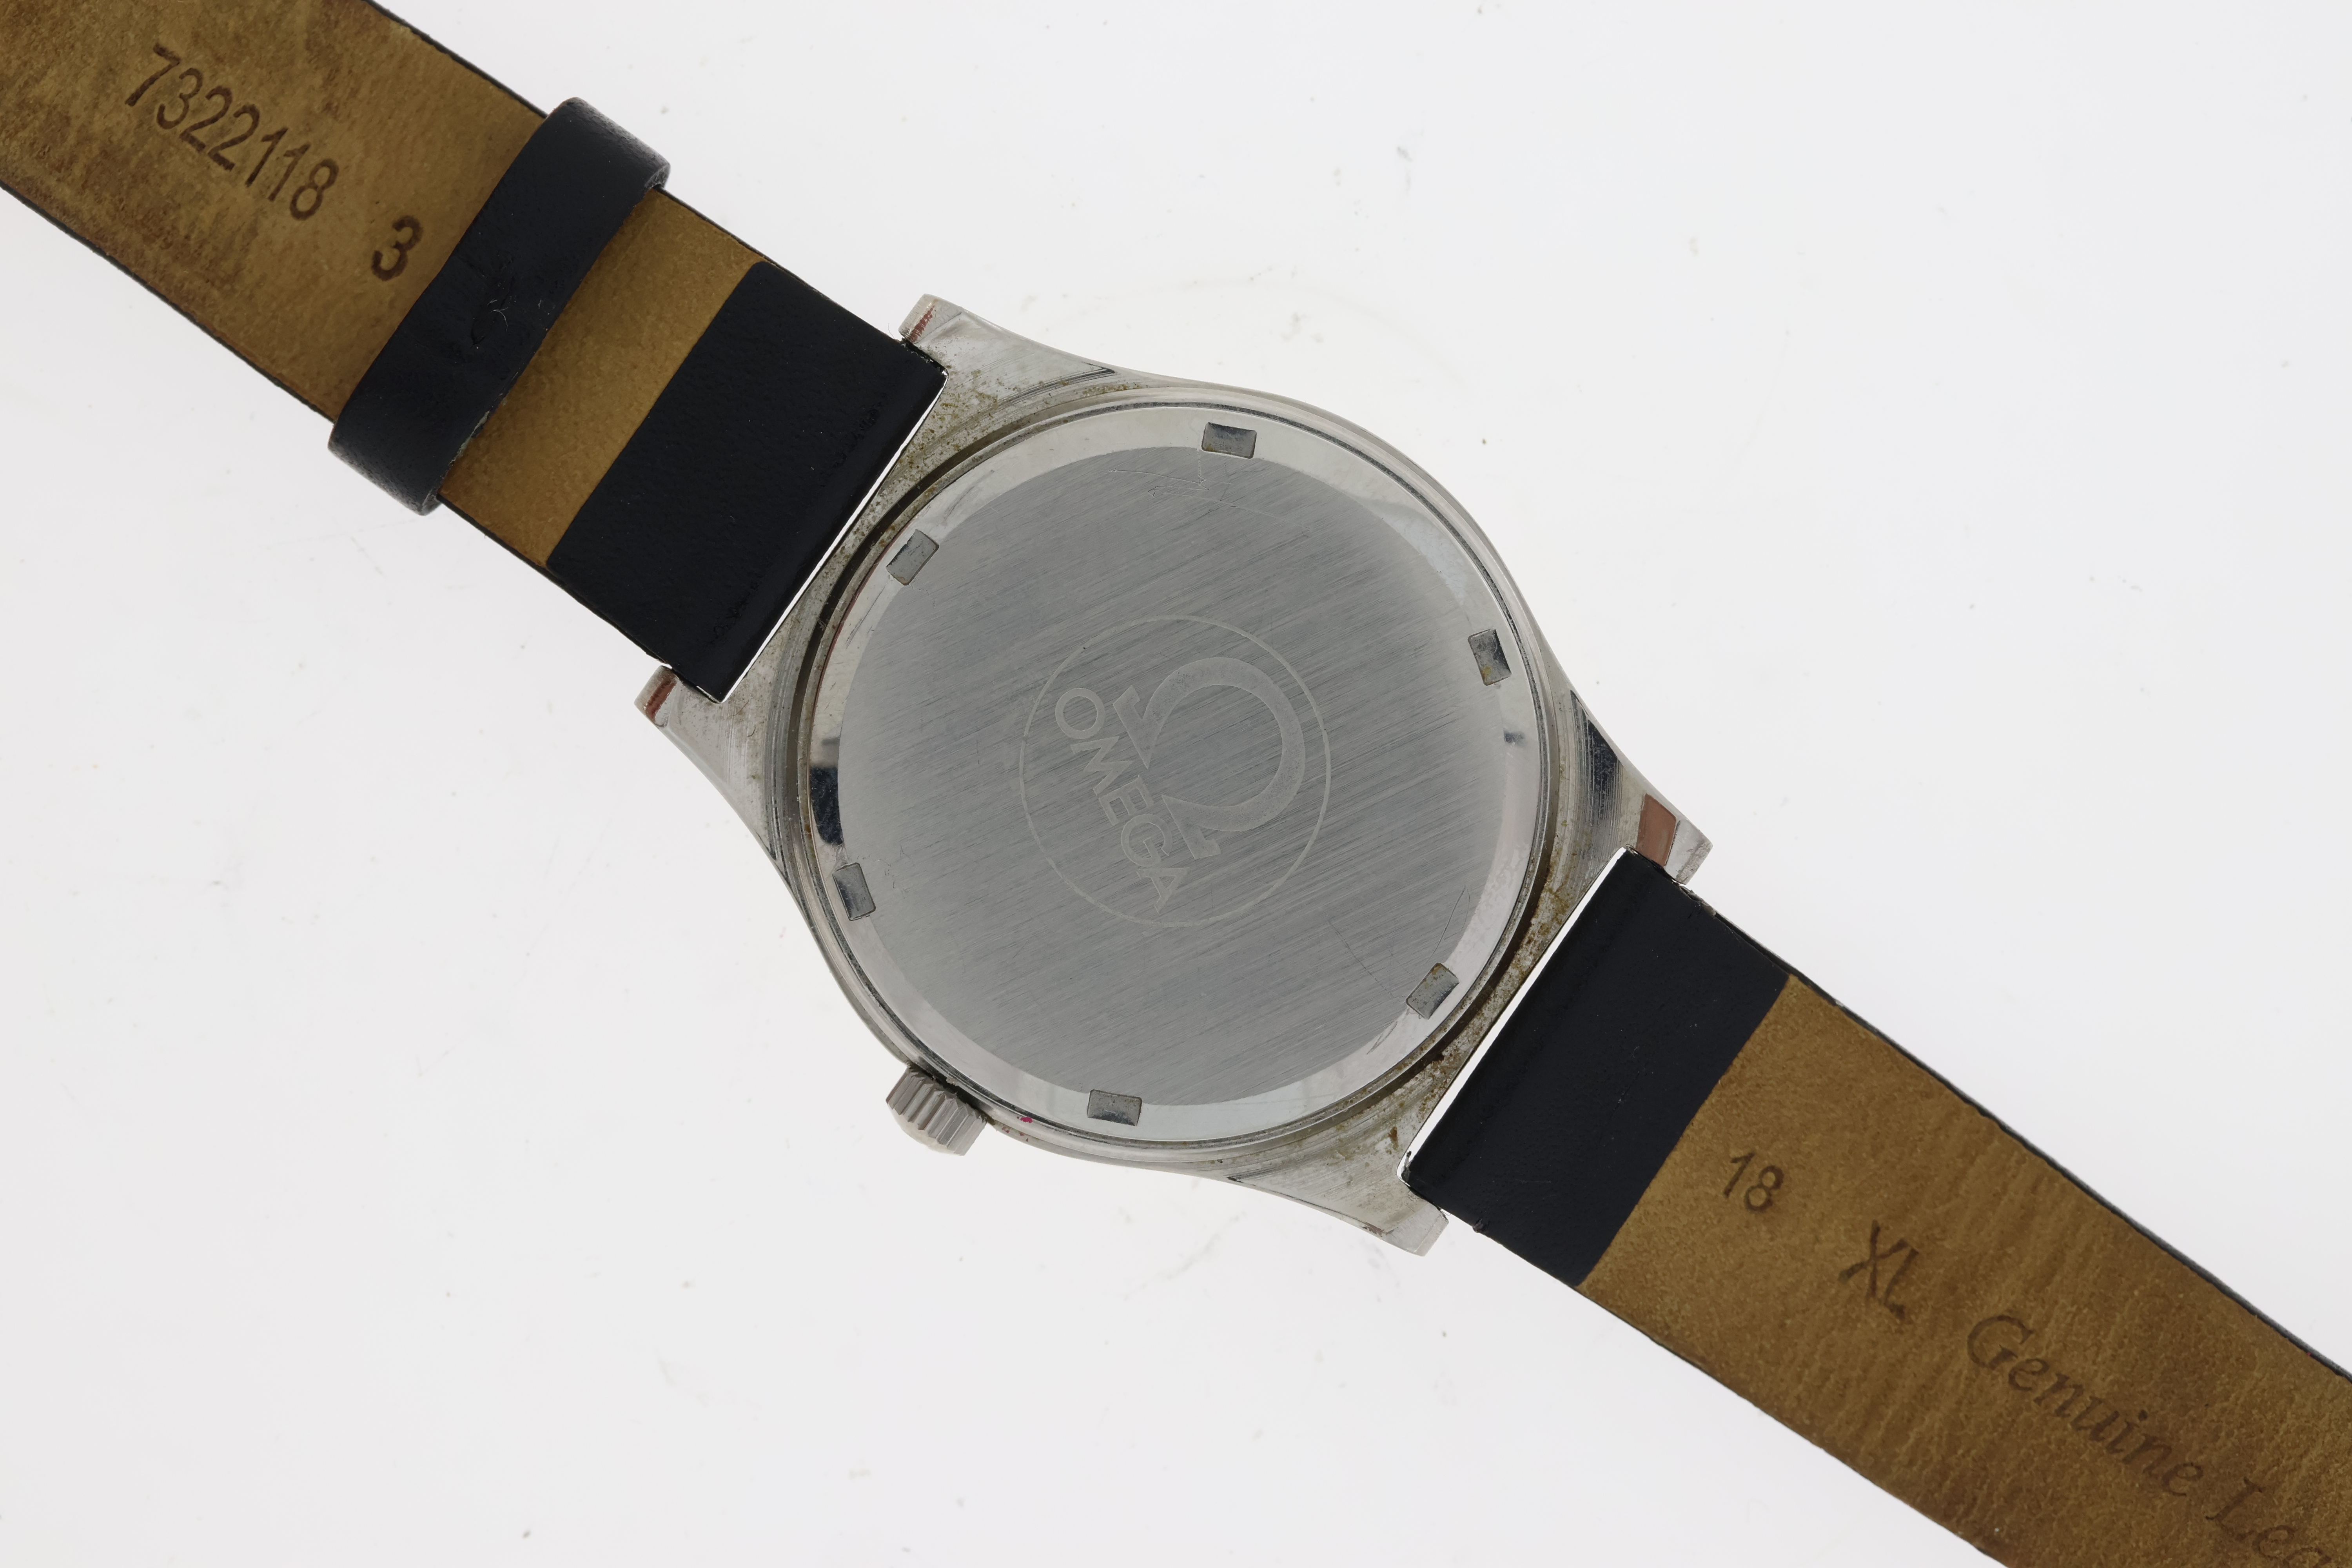 OMEGA GENEVE AUTOMATIC REFERENCE 136.01202 CIRCA 1972, silver dial, black baton hour markers, date - Image 4 of 4